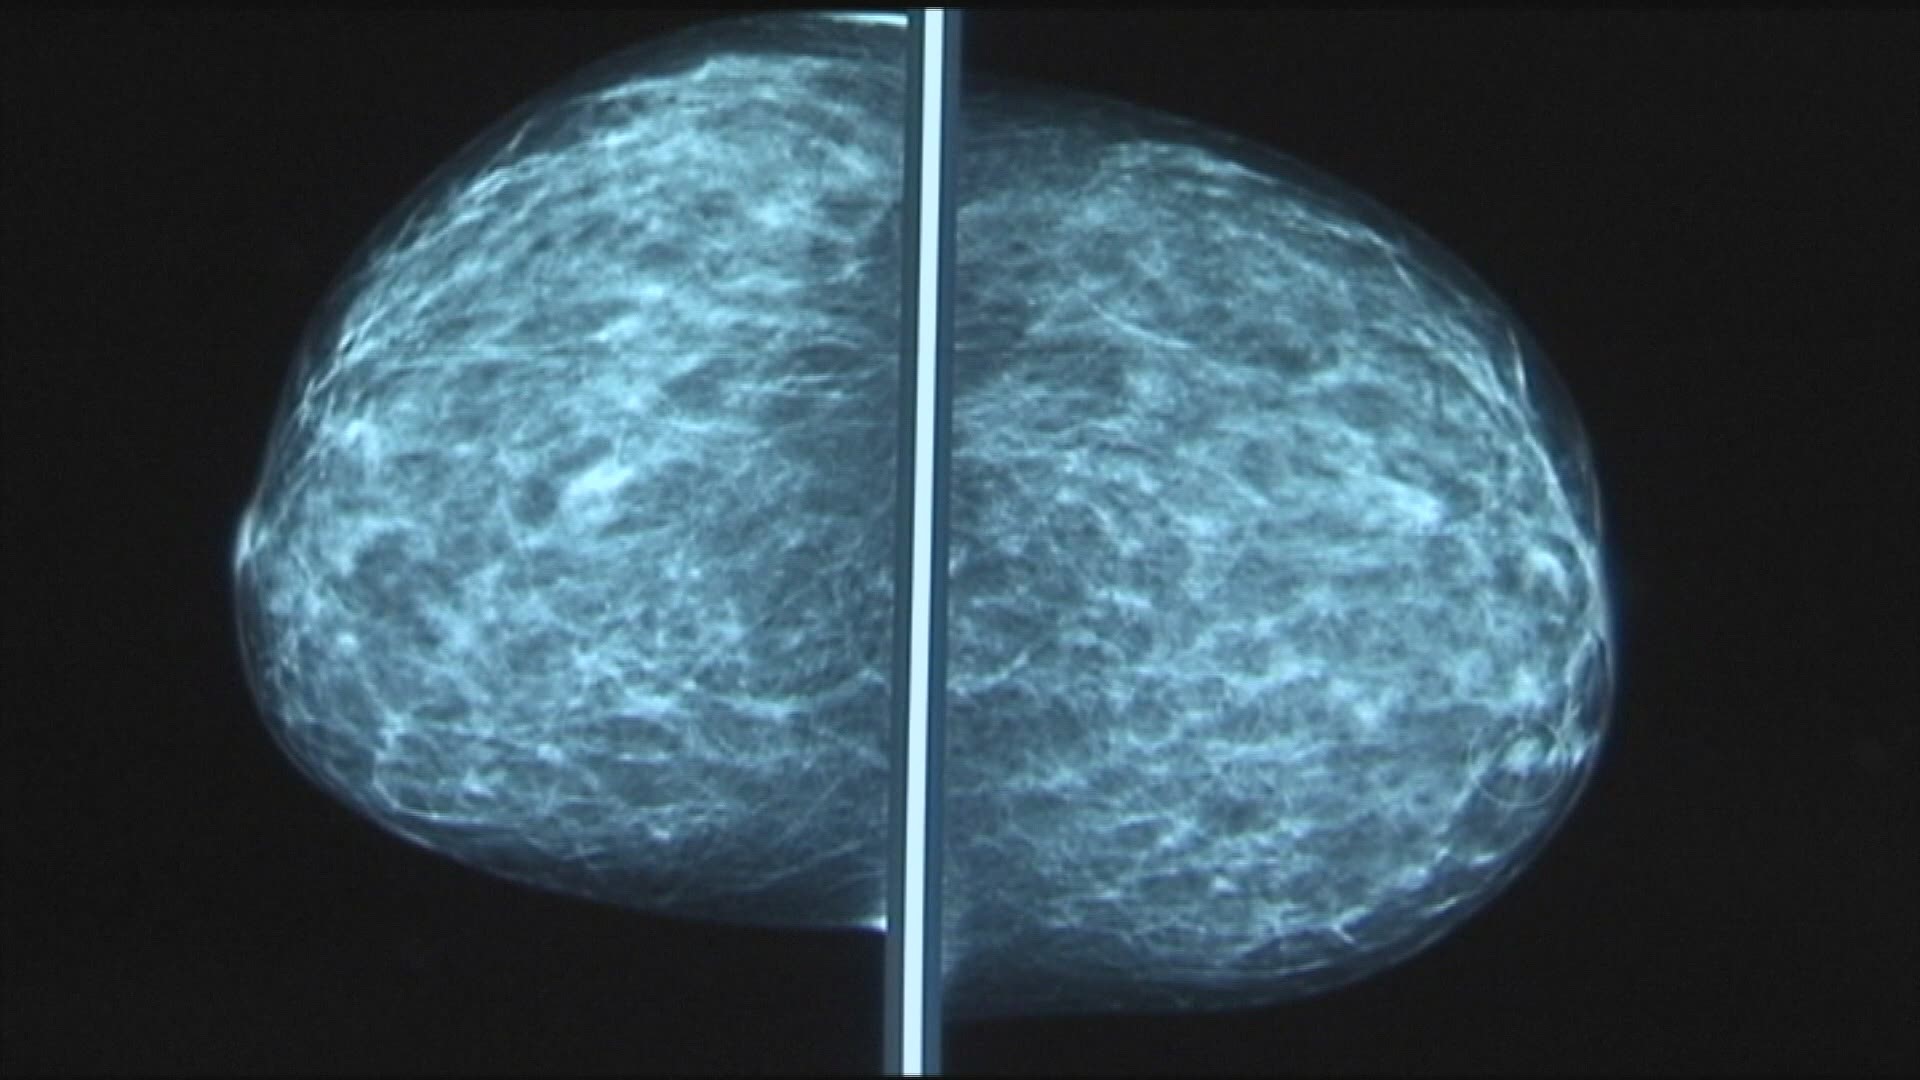 Breast cancer screenings fell by 58% during the pandemic. A breast cancer survivor is warning others to reschedule their missed screenings.